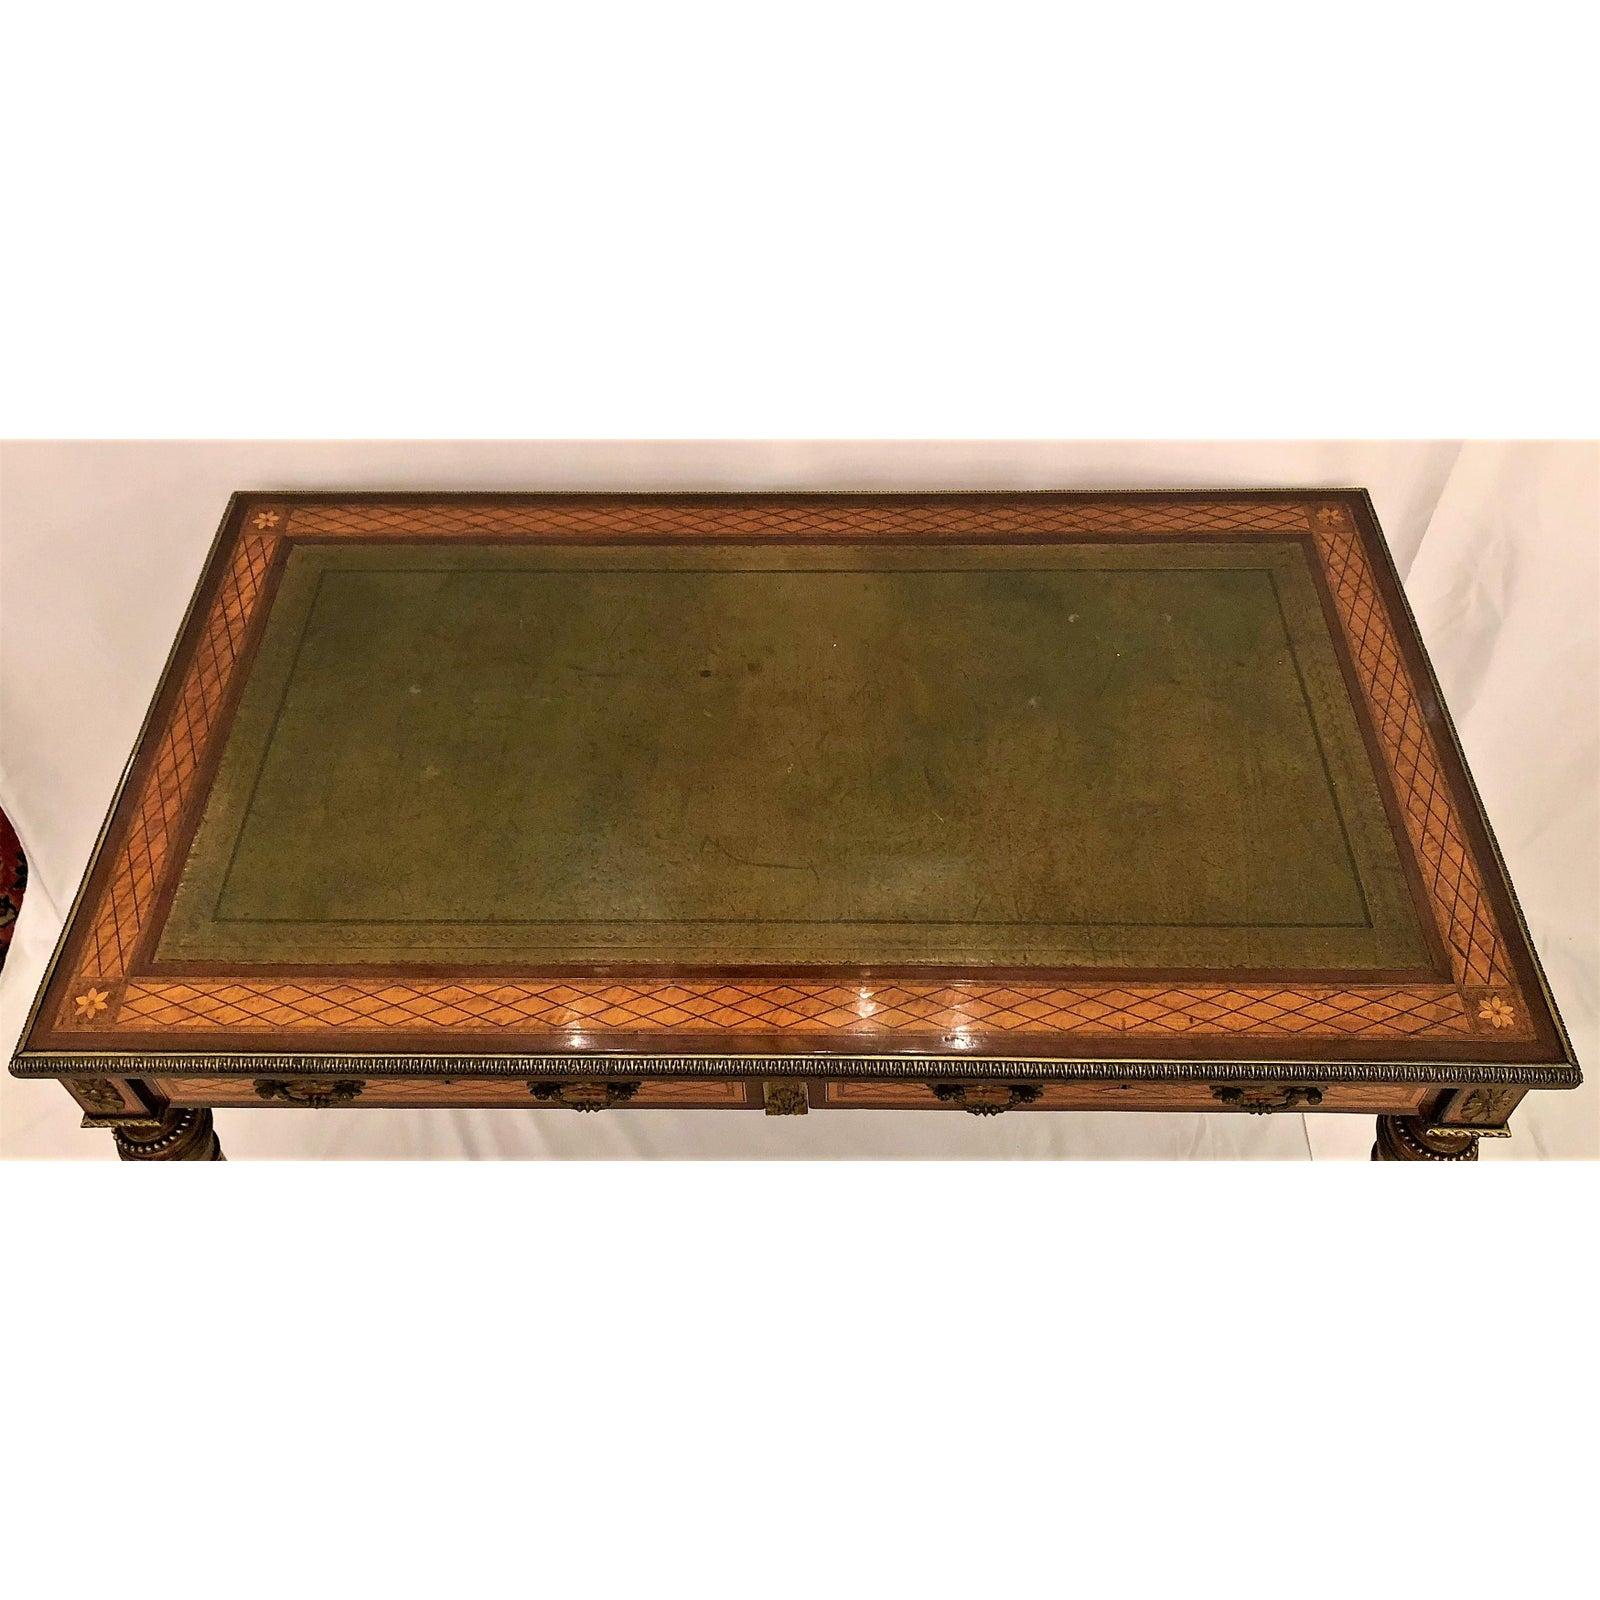 Antique 19th Century French Museum Quality Inlaid Writing Table with Bronze Trim In Good Condition For Sale In New Orleans, LA